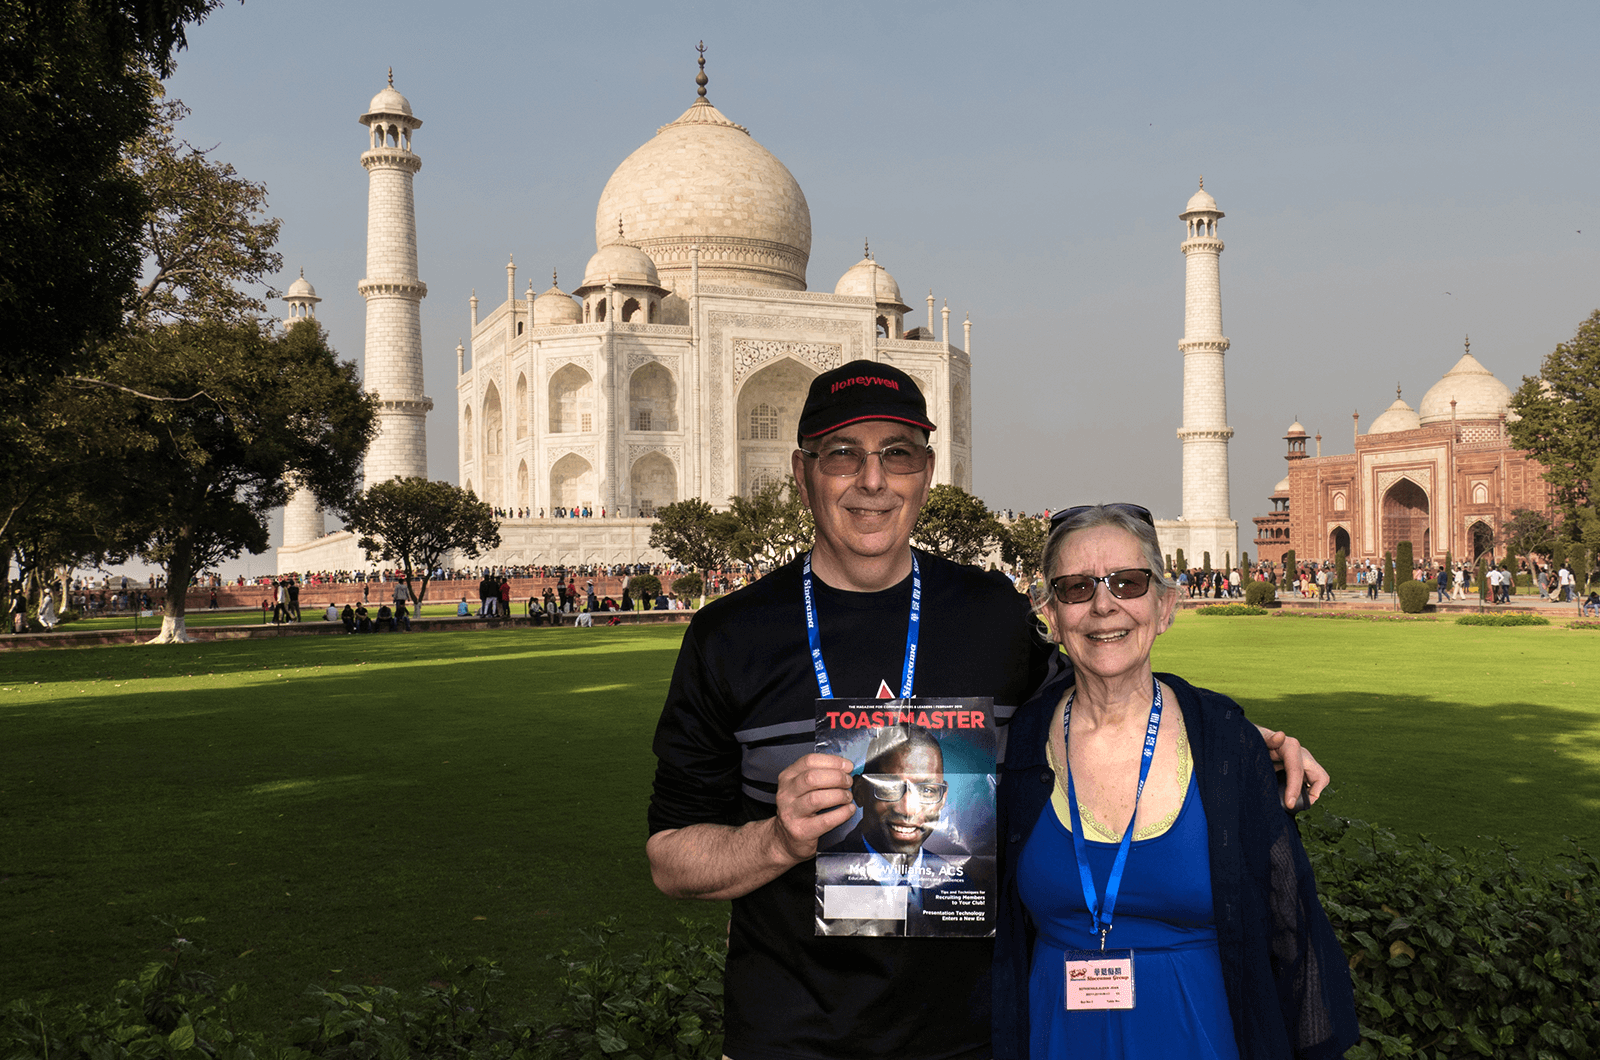 Alexis Rothschild CC, ALB, and Shawn Gold, DTM, from British Columbia, Canada, visit the Taj Mahal in Agra, India. 